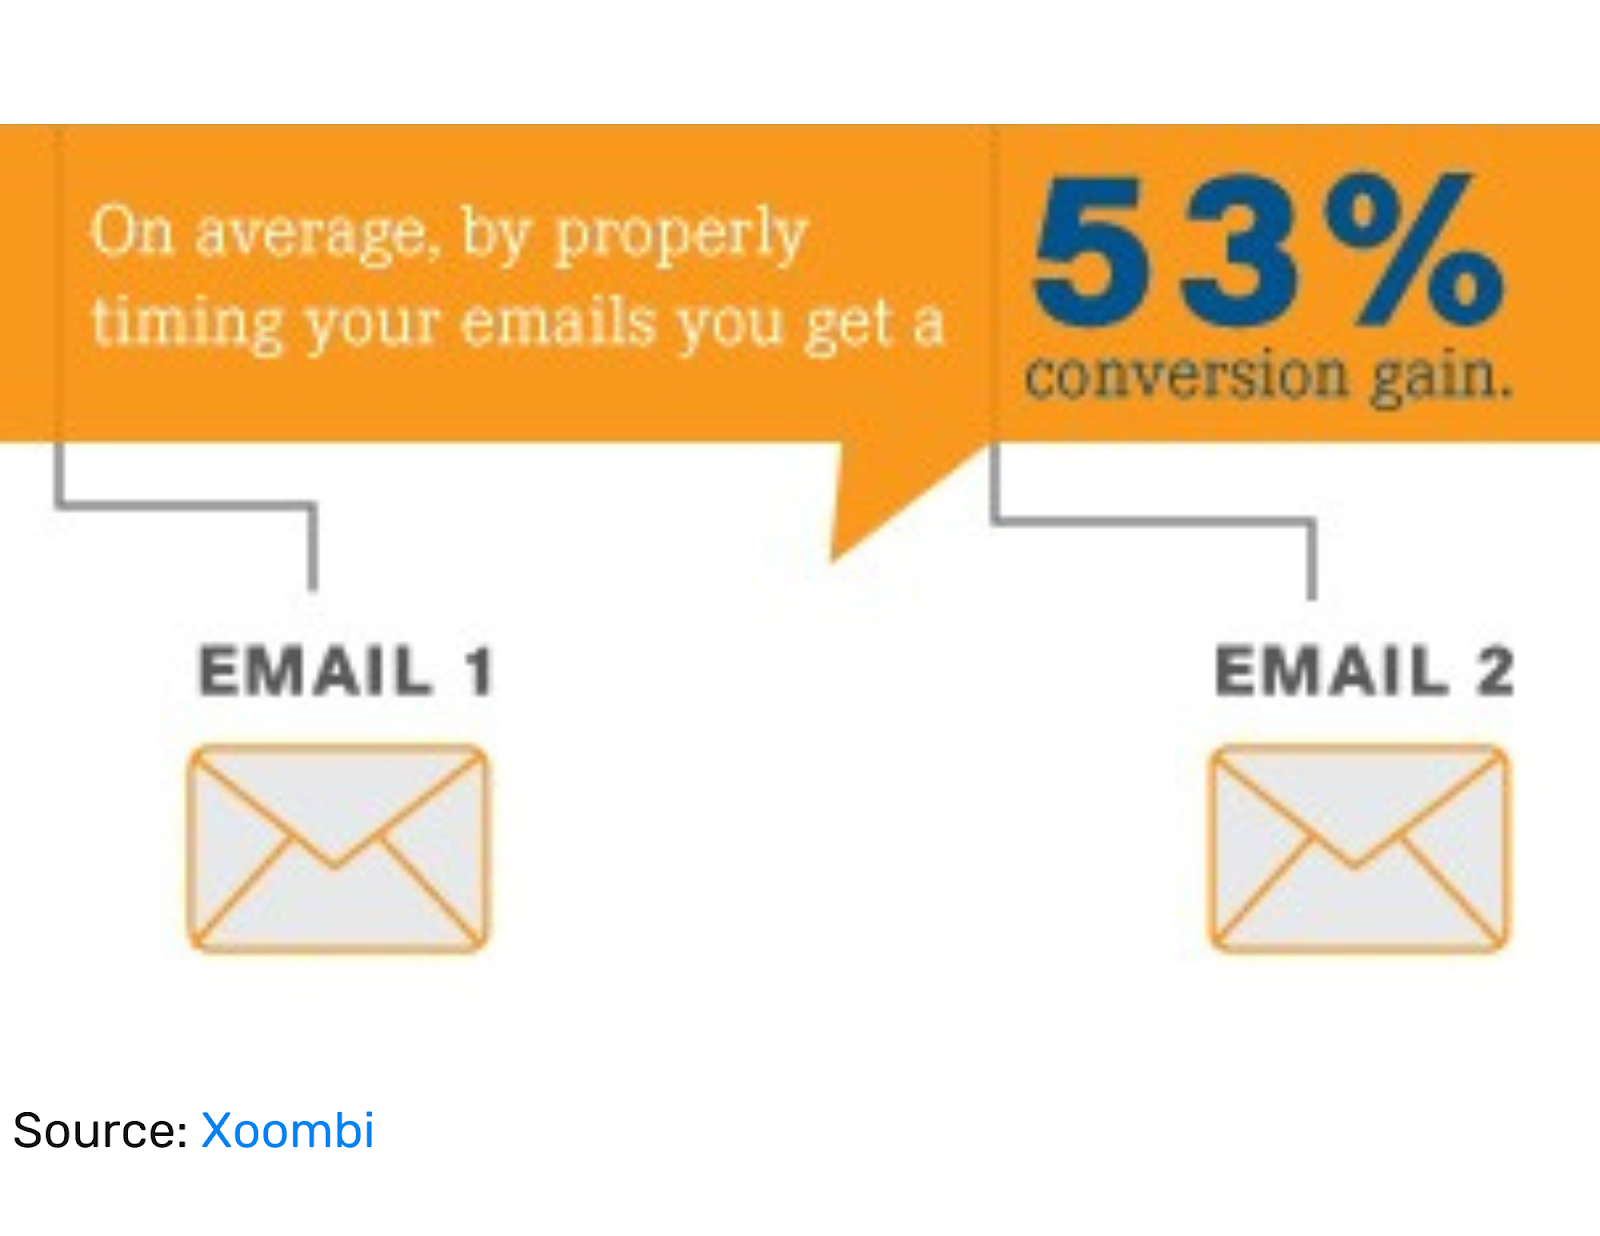 Timing your emails right increases conversions by 53%.
